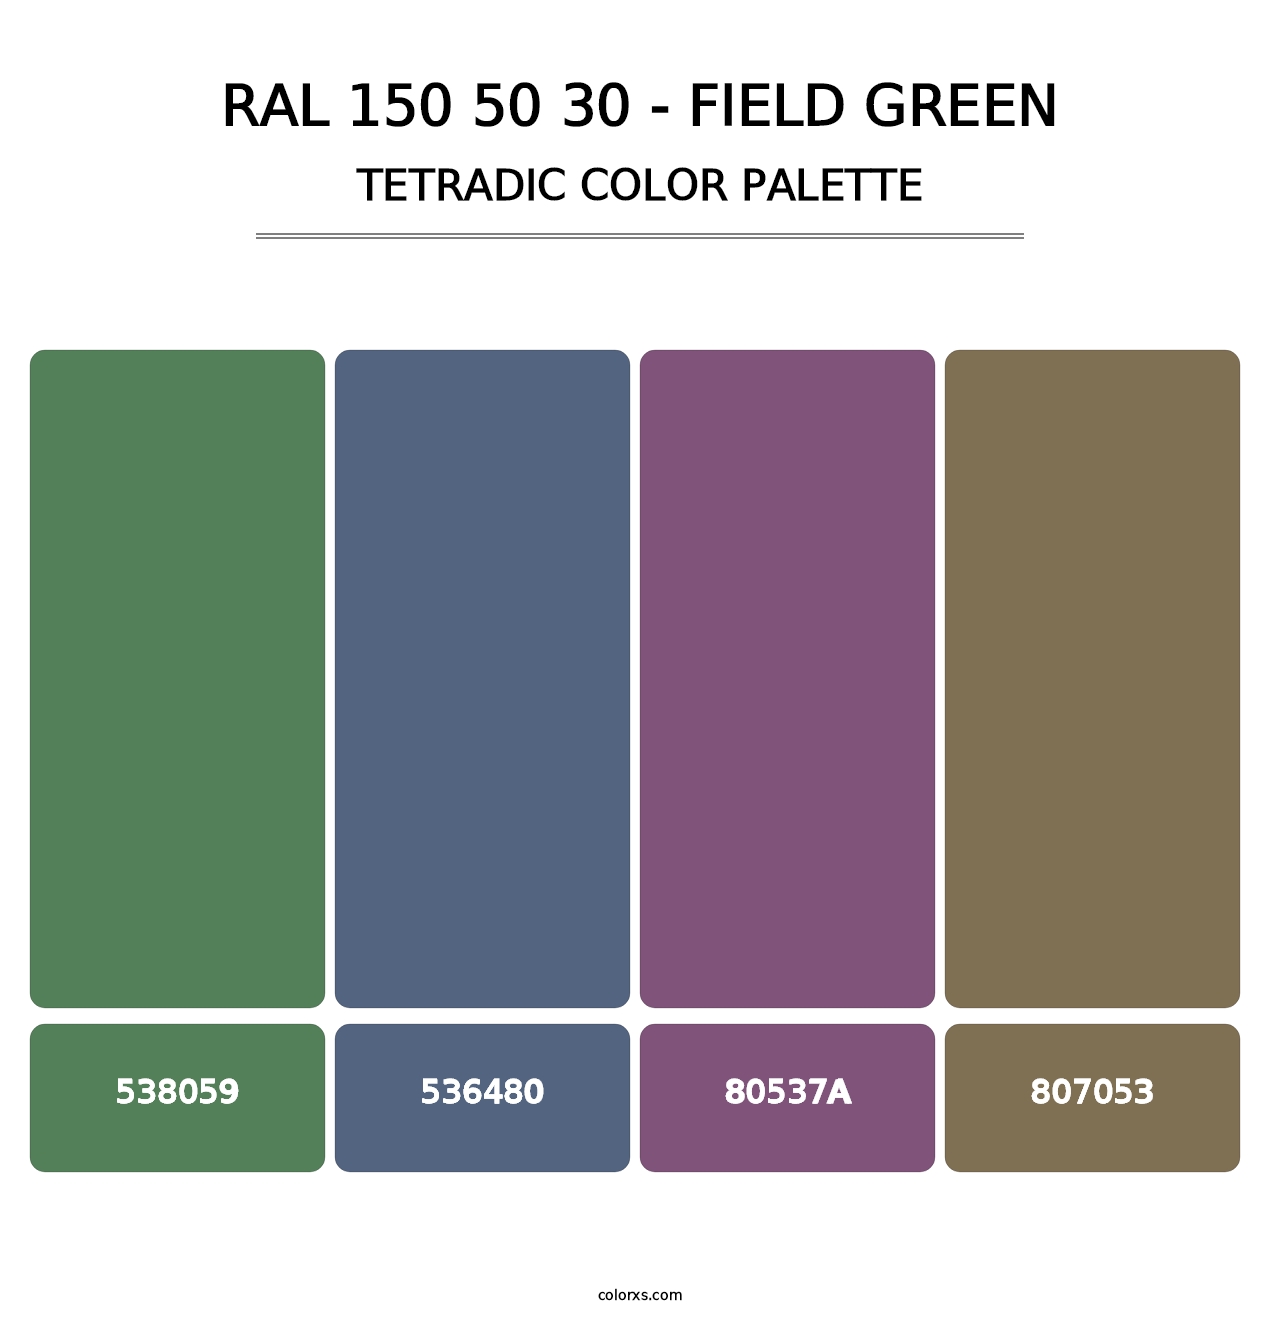 RAL 150 50 30 - Field Green - Tetradic Color Palette